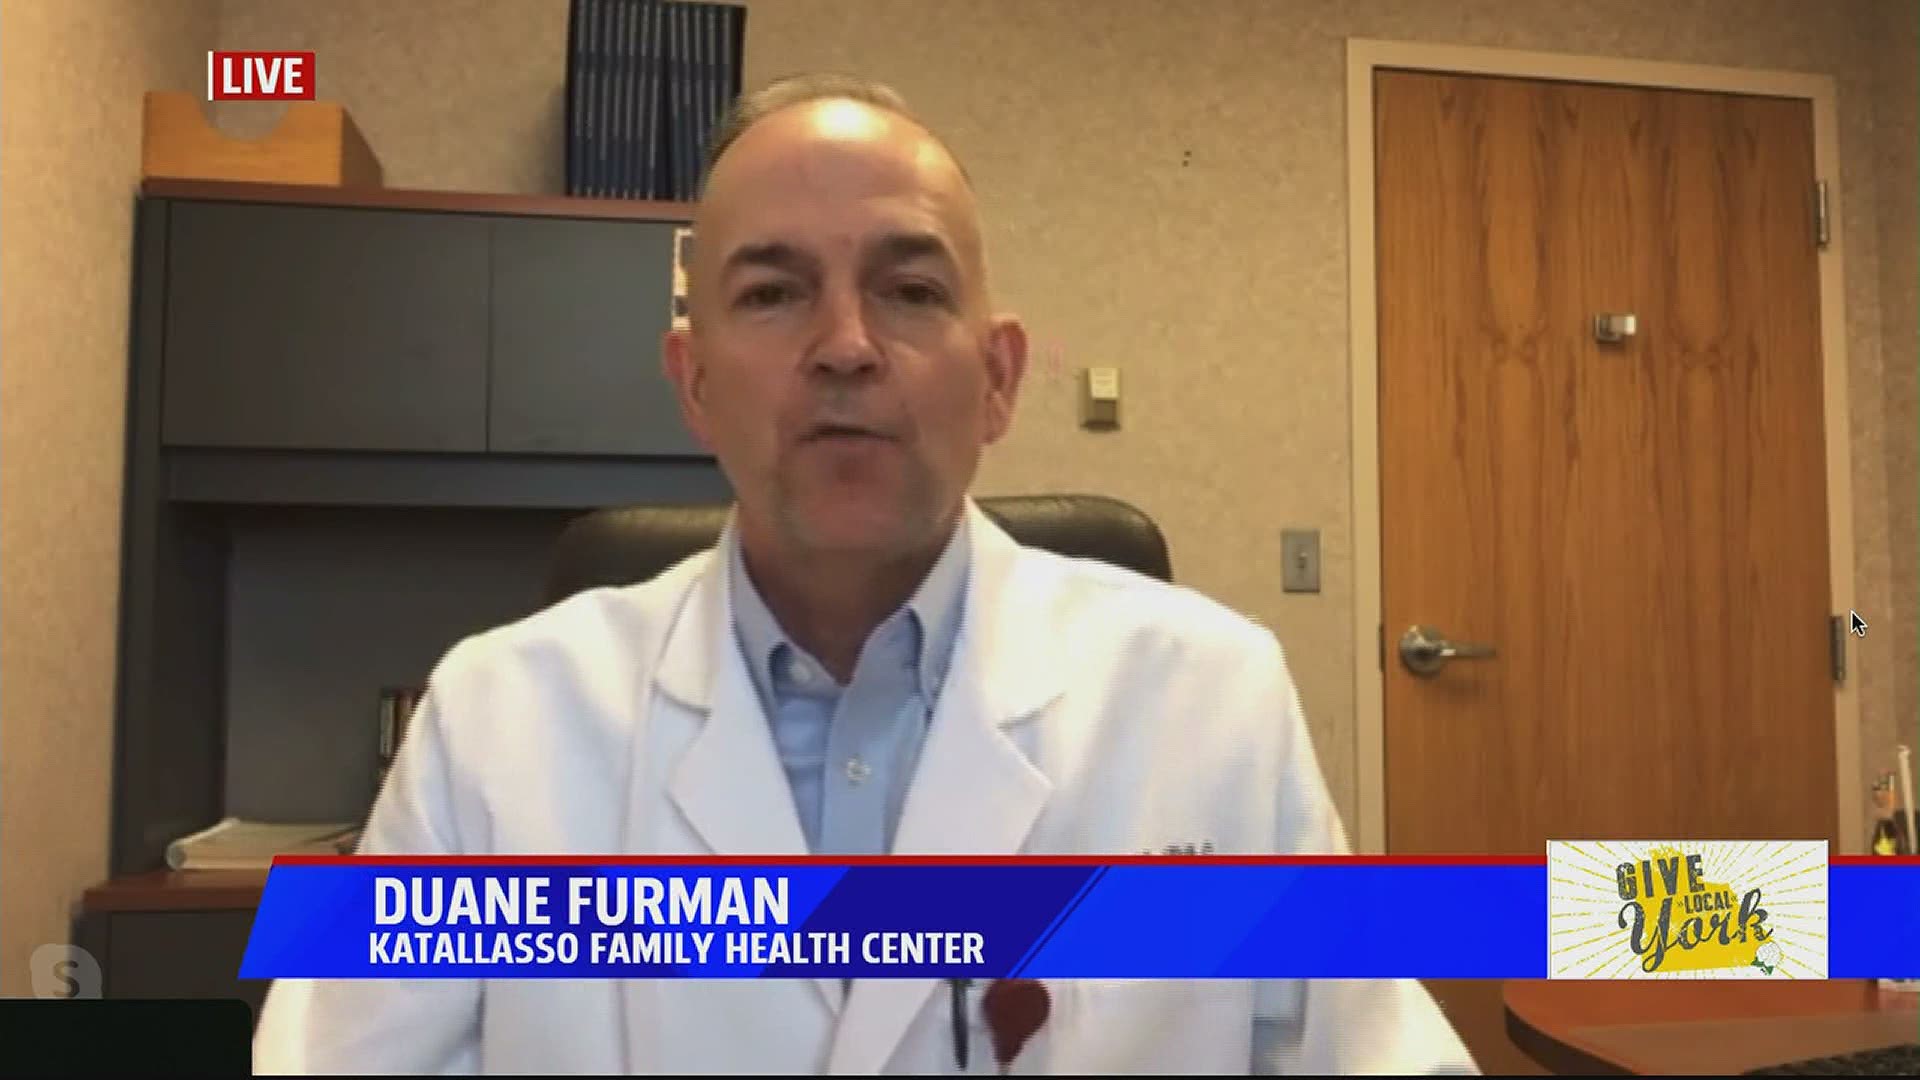 Give Local York is entirely online this year due to COVID 19, Duane from Katallasso Family Health Center discusses how you can still give to your local community